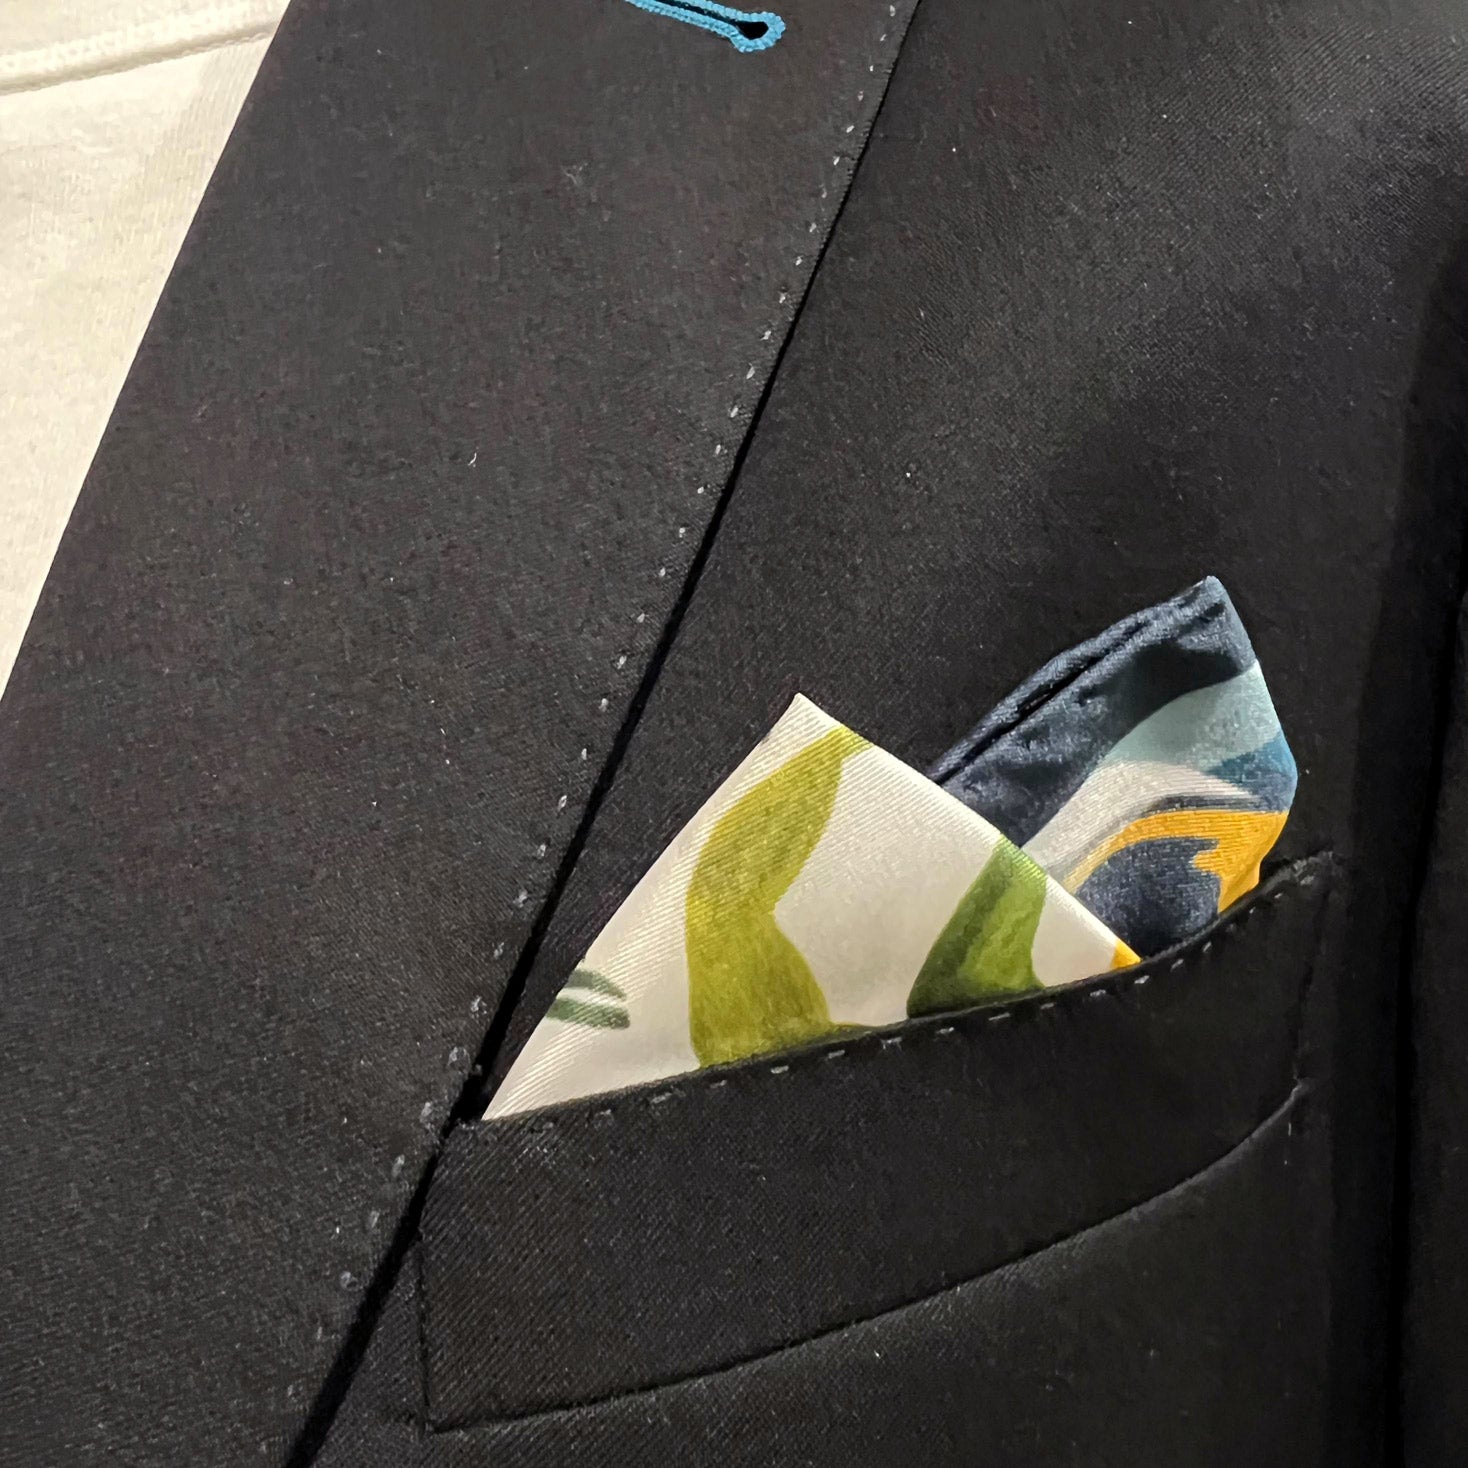 Silk square handkerchief with toucan bird pattern on a blue ground and placed in a jacket breast pocket.